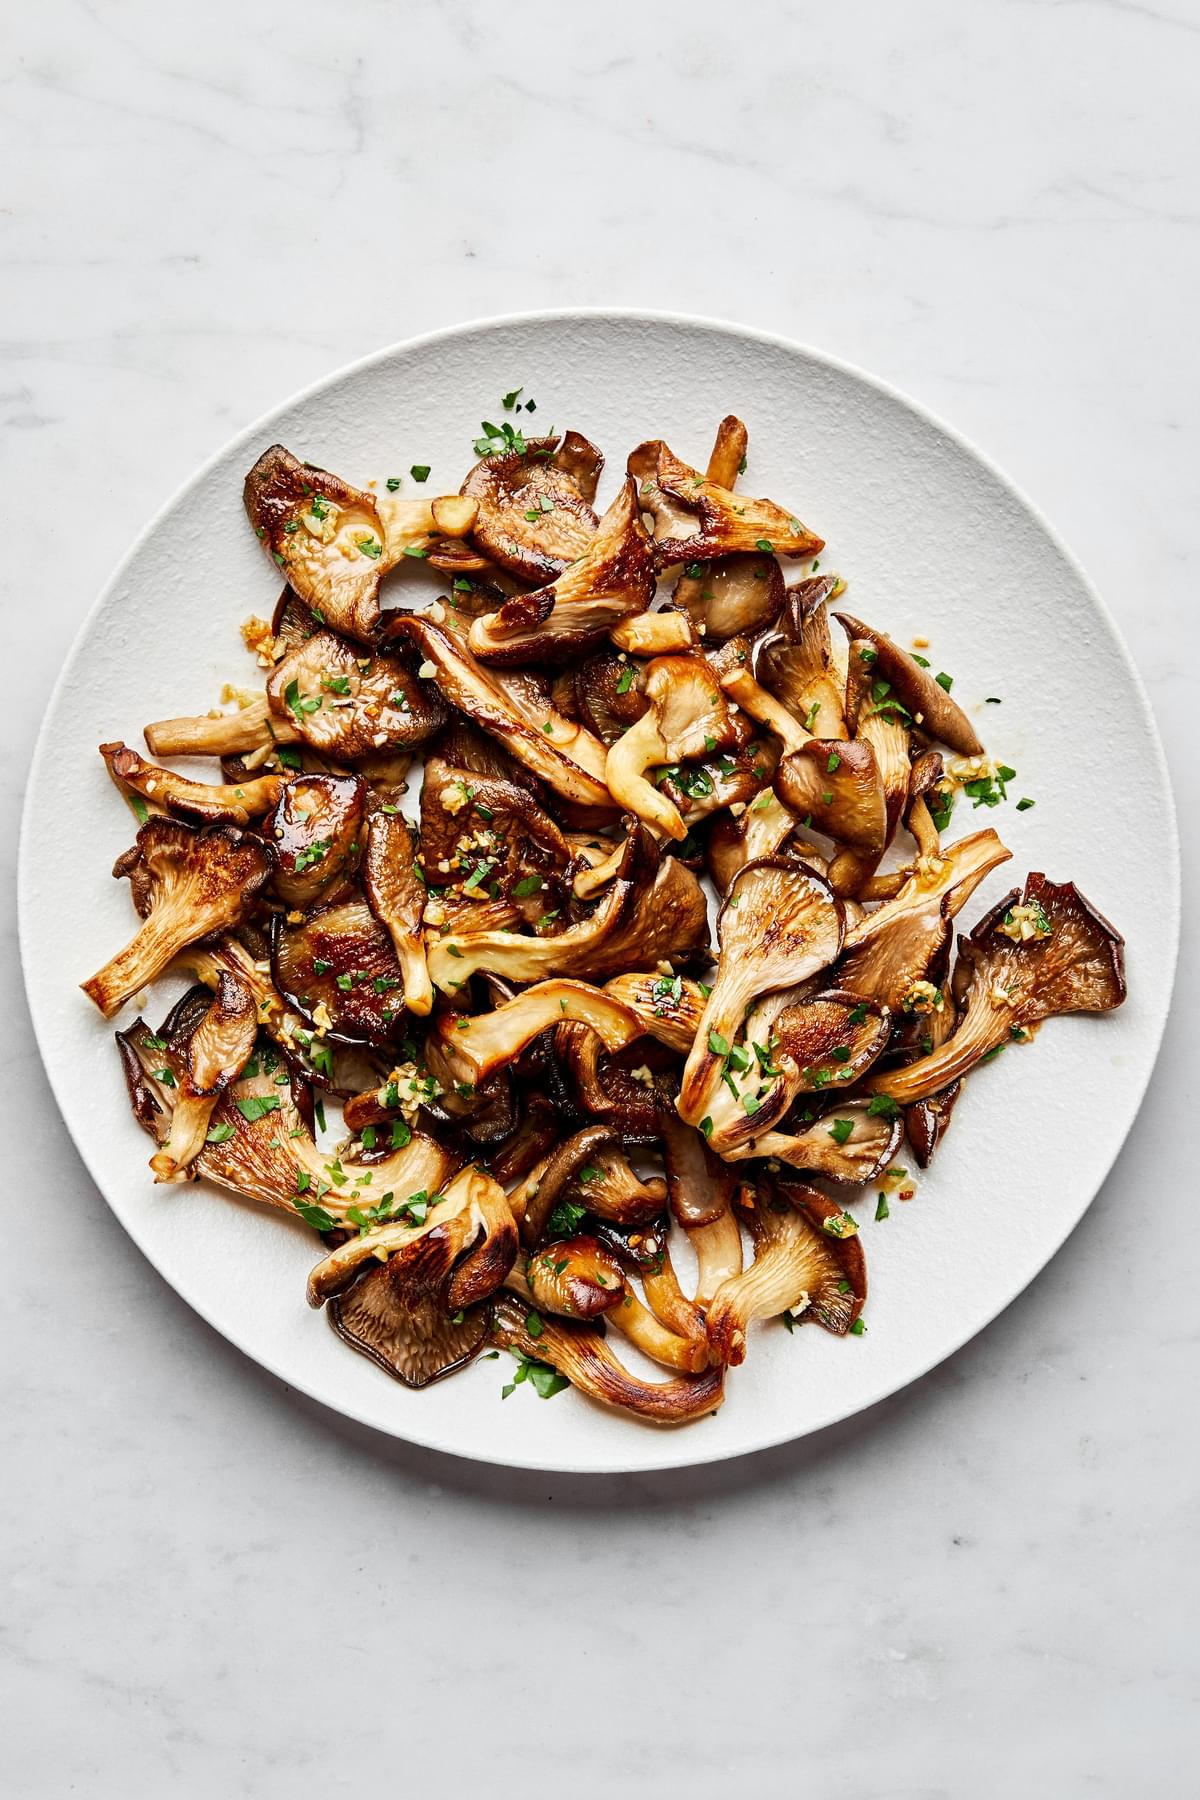 a plate of garlic butter oyster mushrooms cooked in salt, olive oil, butter, garlic and sprinkled with fresh parsley